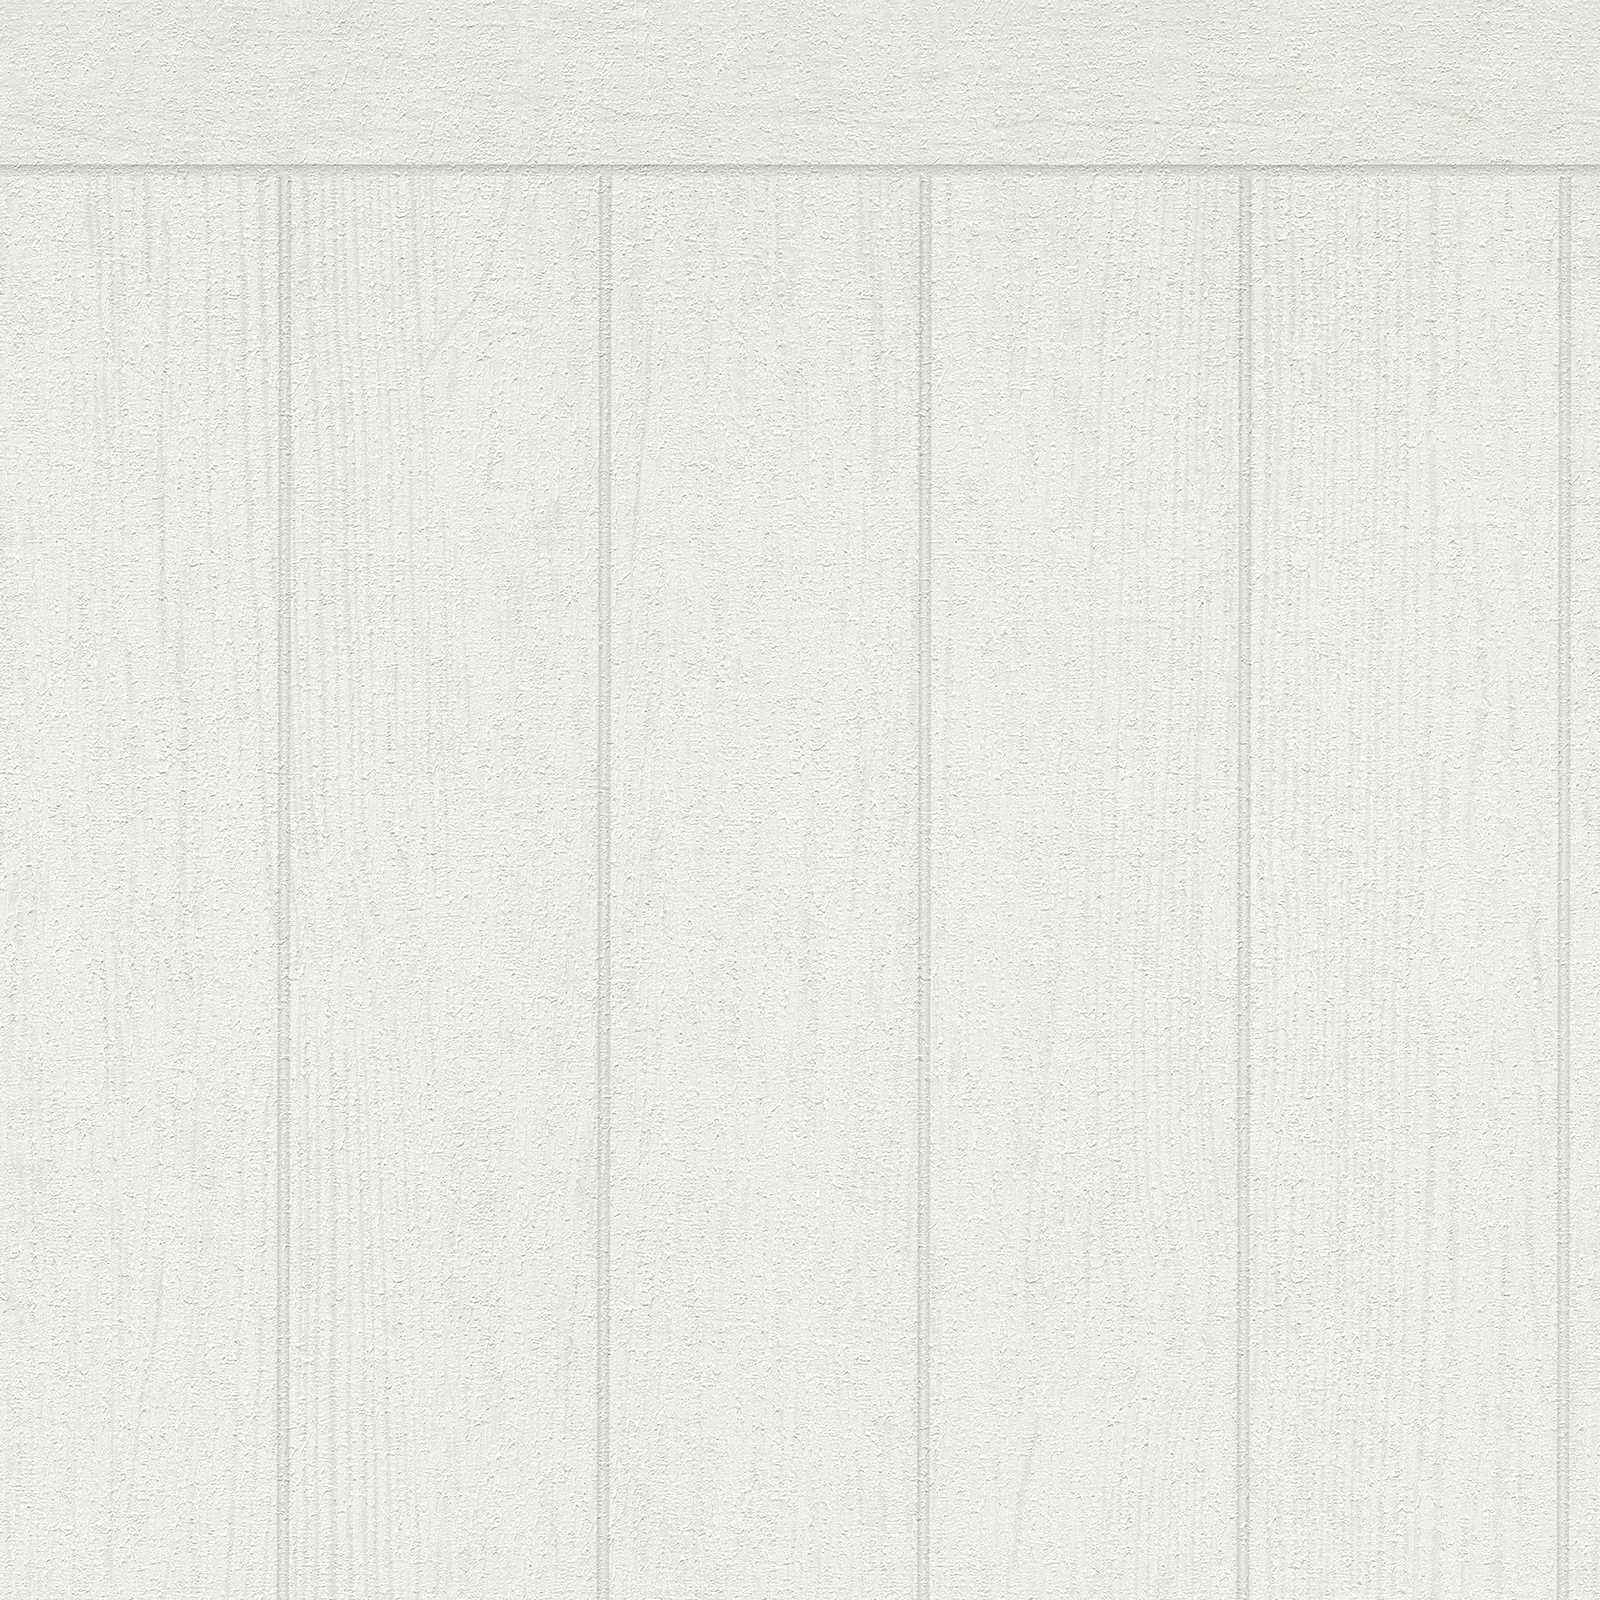 Non-woven wall panel in wooden beam look - white, cream
